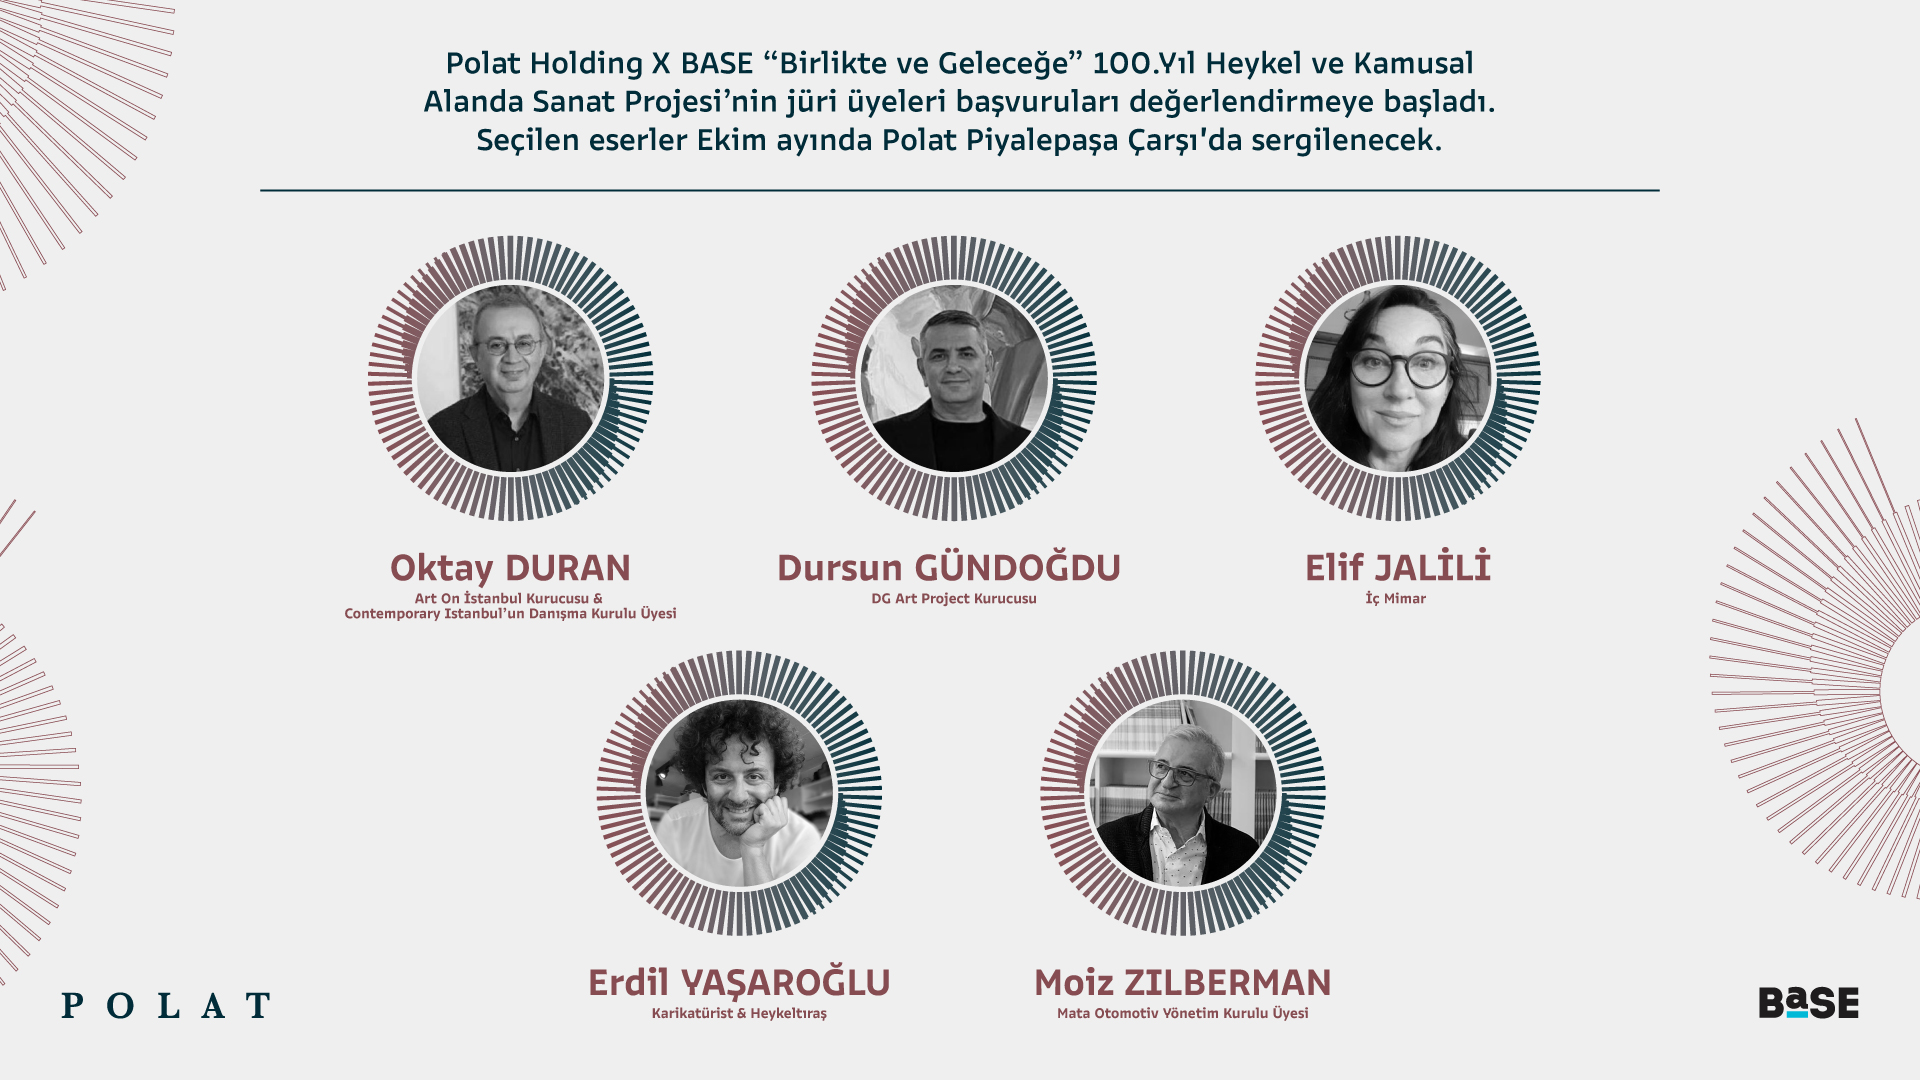 Polat Holding X BASE Together and to the Future 100th Anniversary Jury members of the Sculpture and Public Space Project started to evaluate the applications. Selected works will be exhibited in Polat Piyalepaşa Çarşı Strip Mall in October.